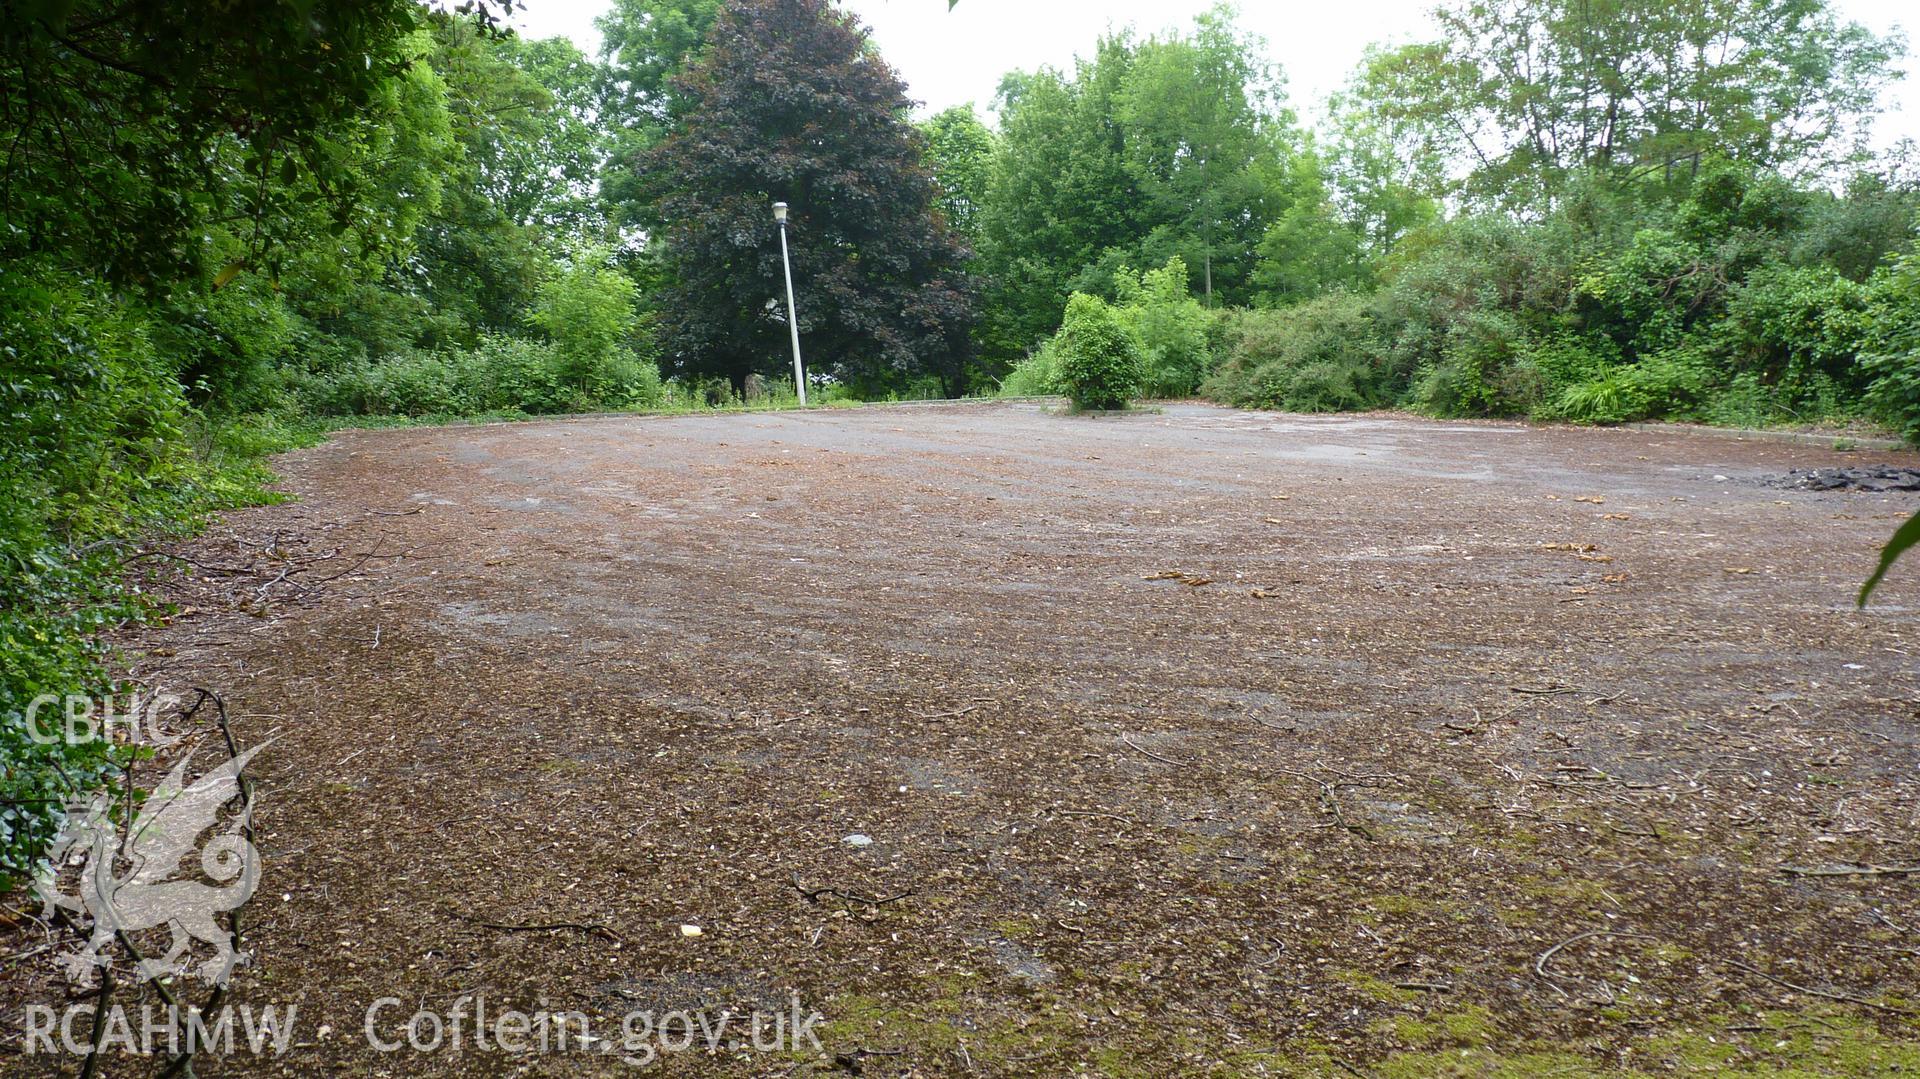 'View southeast across the car park at the northern end of the site.' Photographed as part of archaeological work at Coed Parc, Newcastle, Bridgend, carried out by Archaeology Wales, 2016. Project no. P2432.